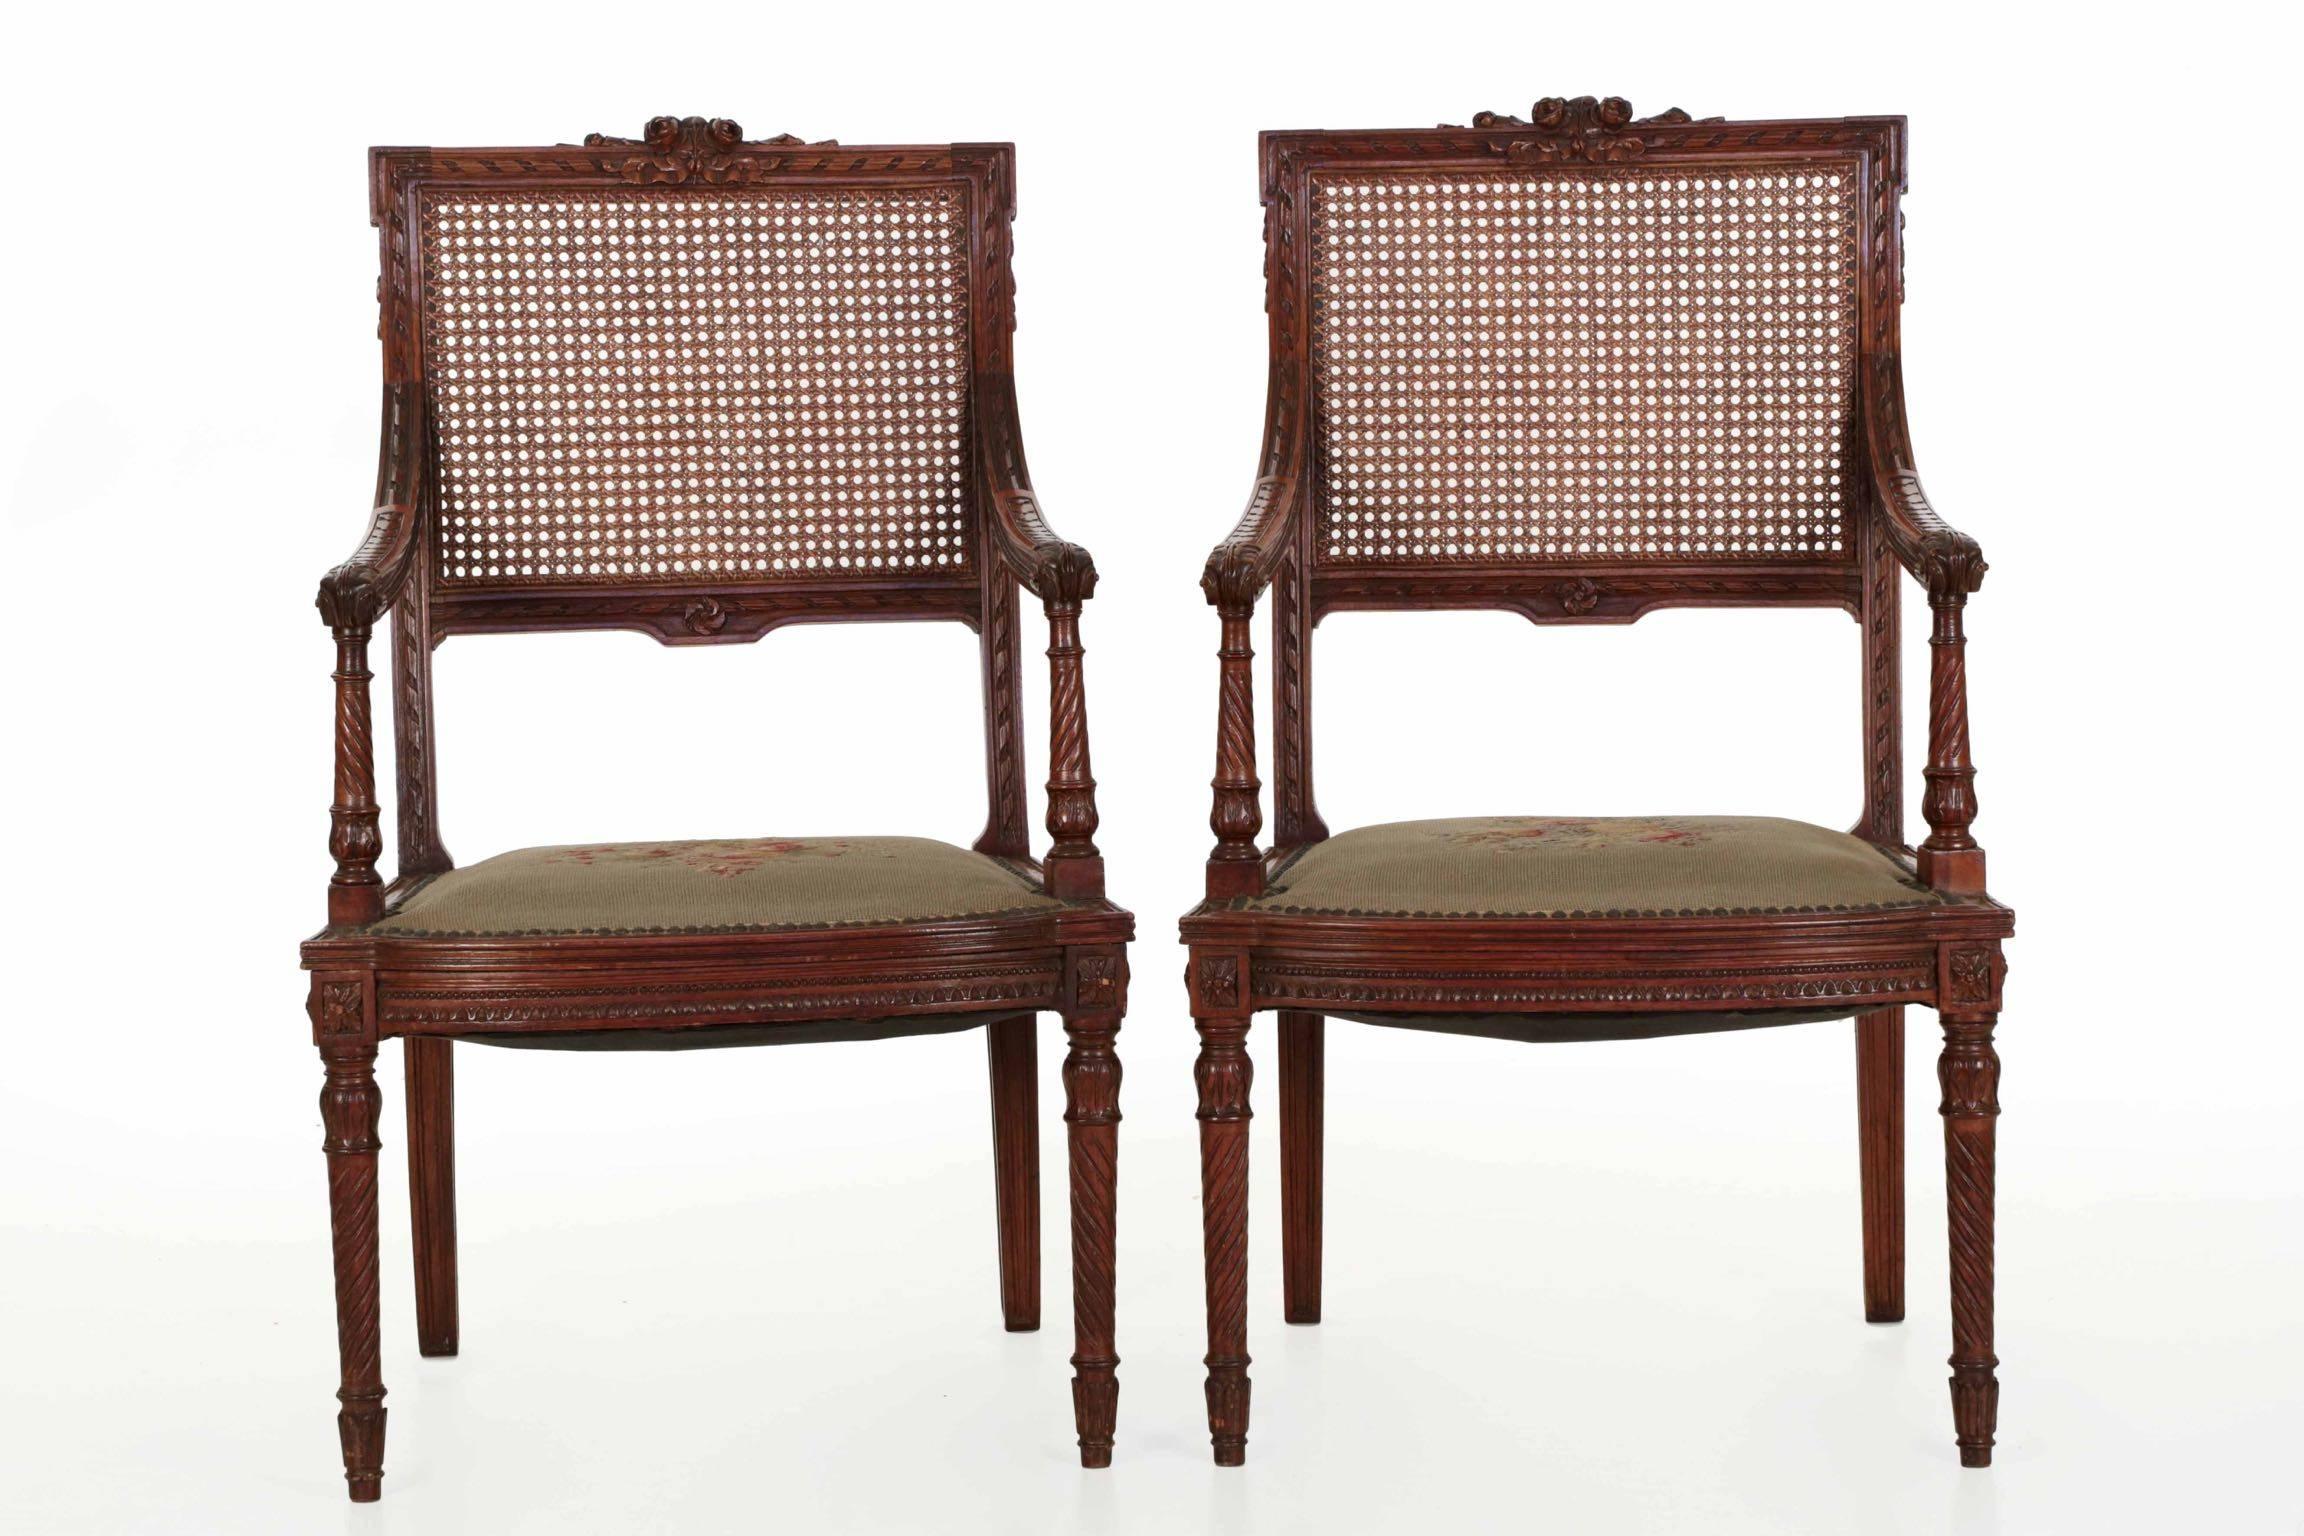 The crisp carved surface embellishment of these neoclassical chairs is noteworthy, the hand carved detailing deep and exquisite. The walnut has been burnished to a high glow from years of careful use, the mellowed patina most attractive throughout.